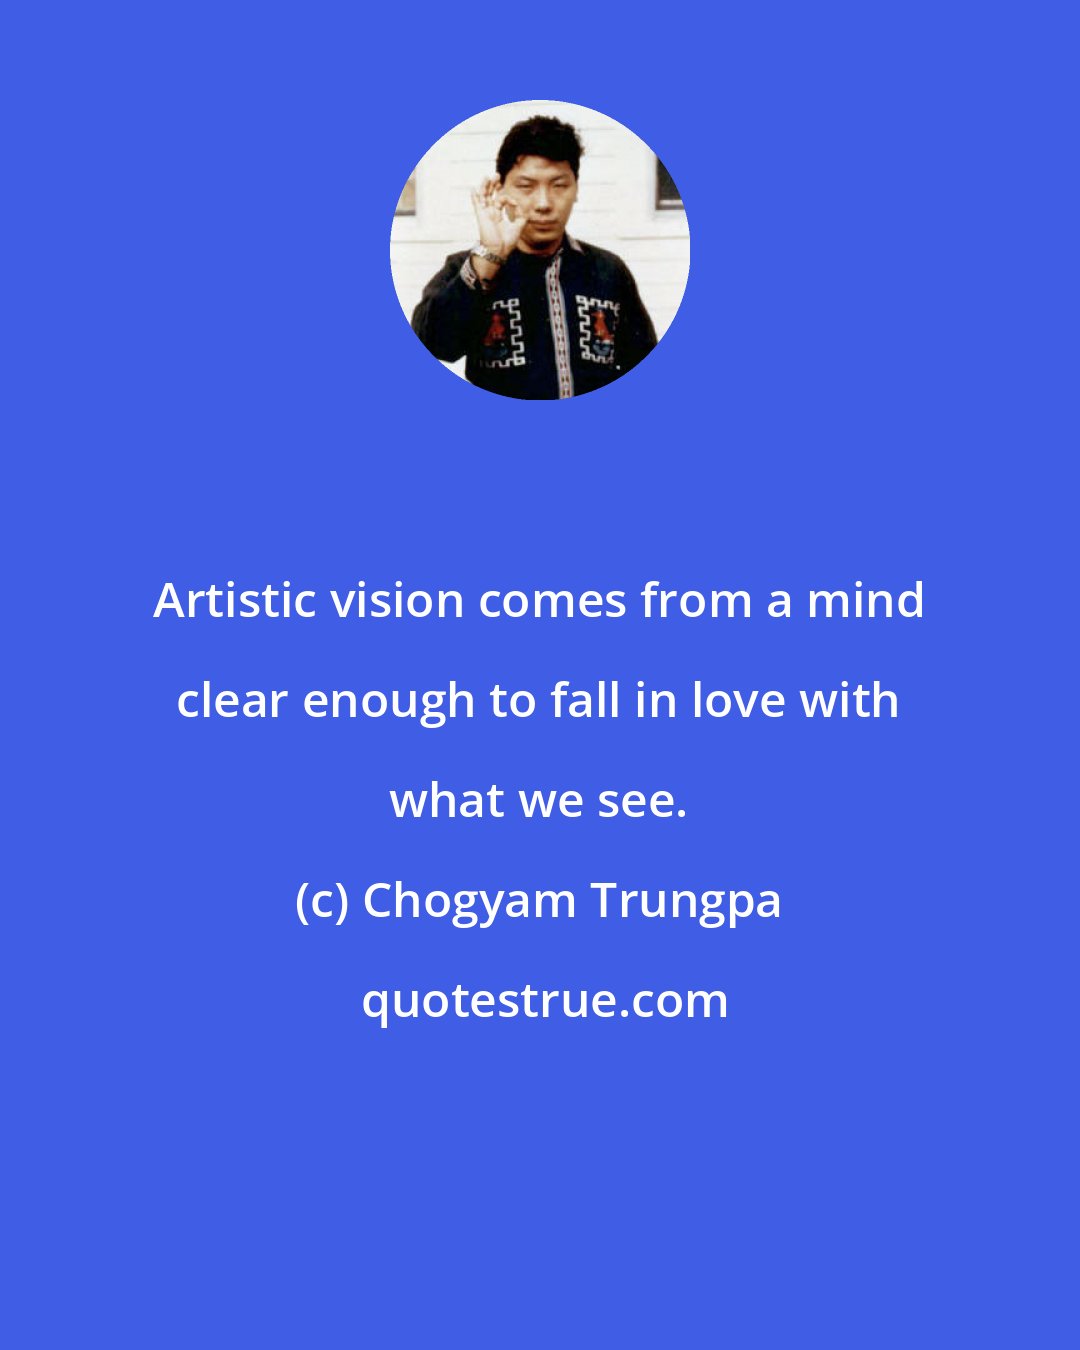 Chogyam Trungpa: Artistic vision comes from a mind clear enough to fall in love with what we see.